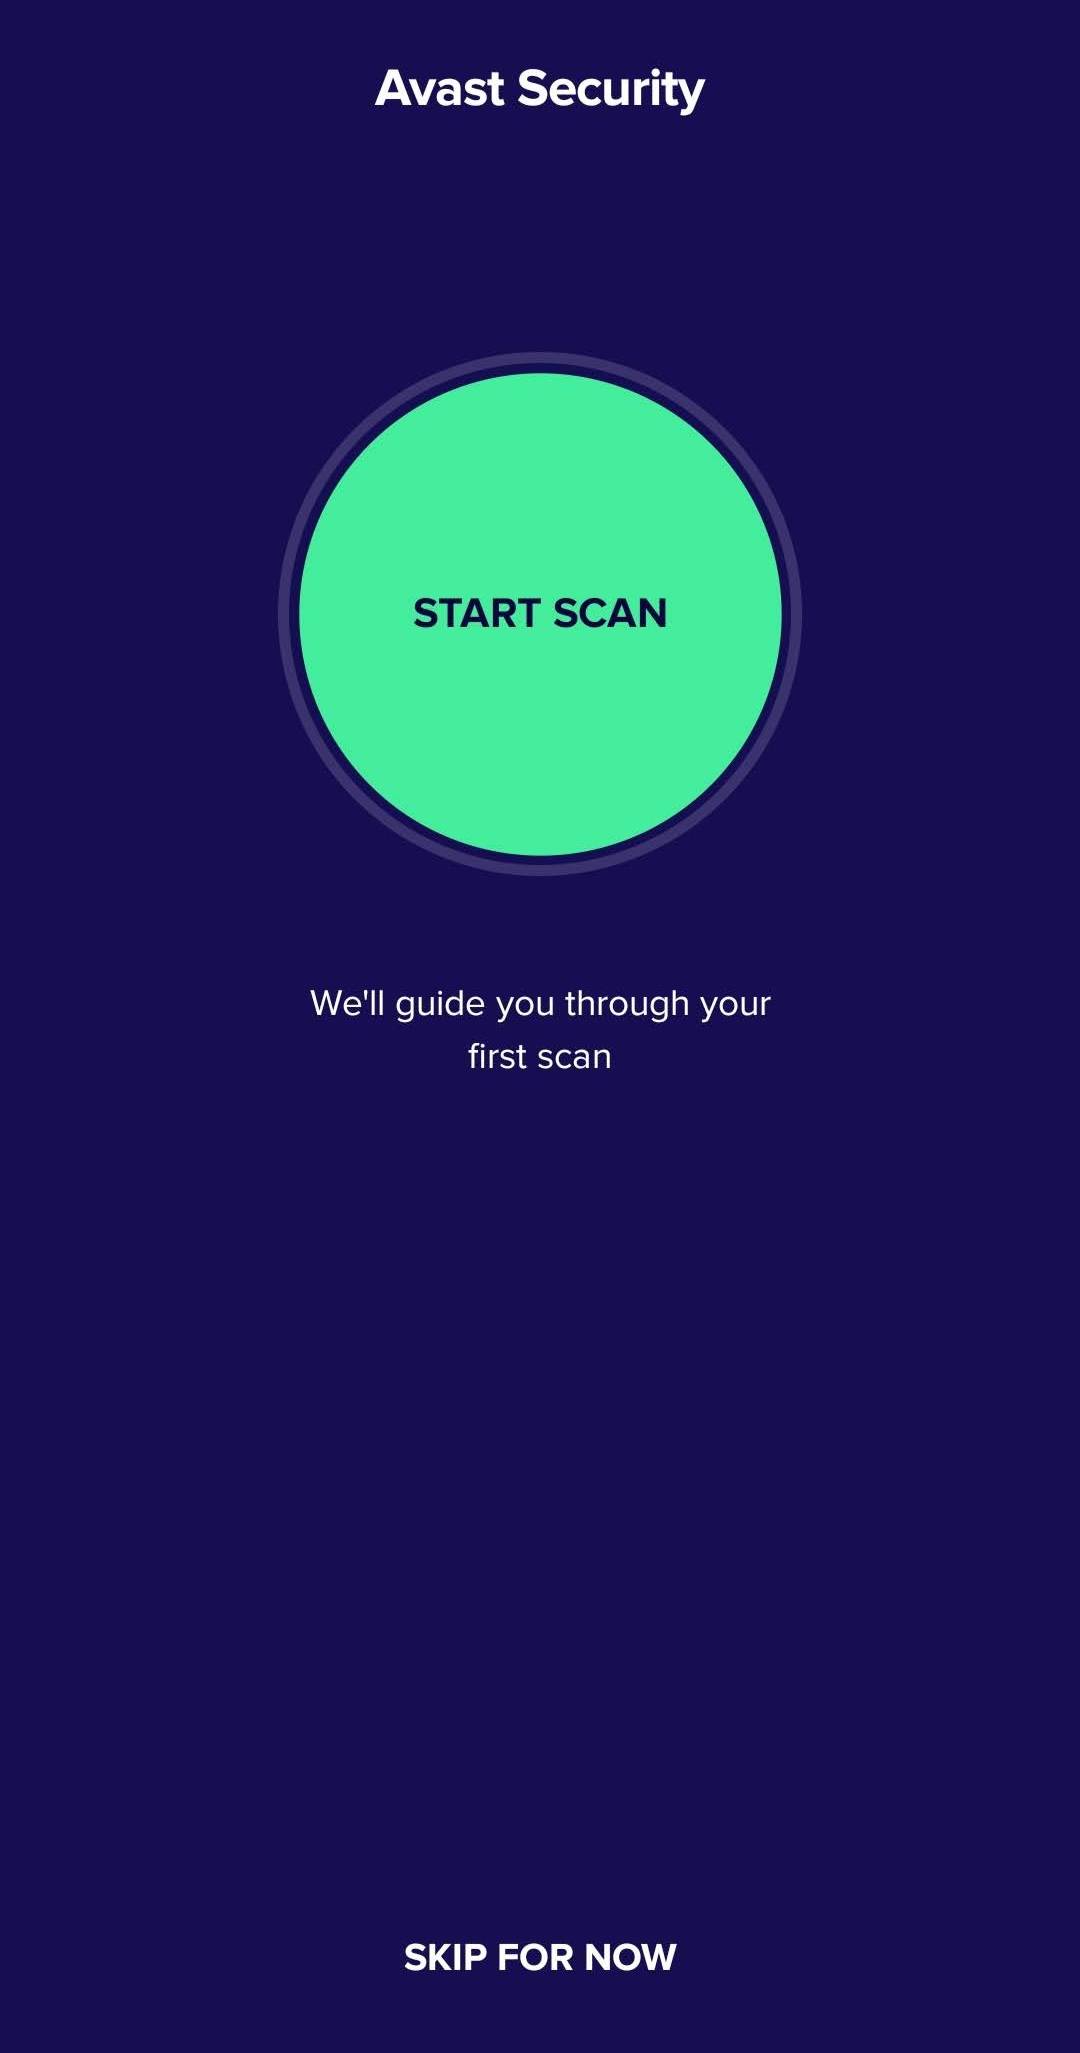 Starting the Avast scan.